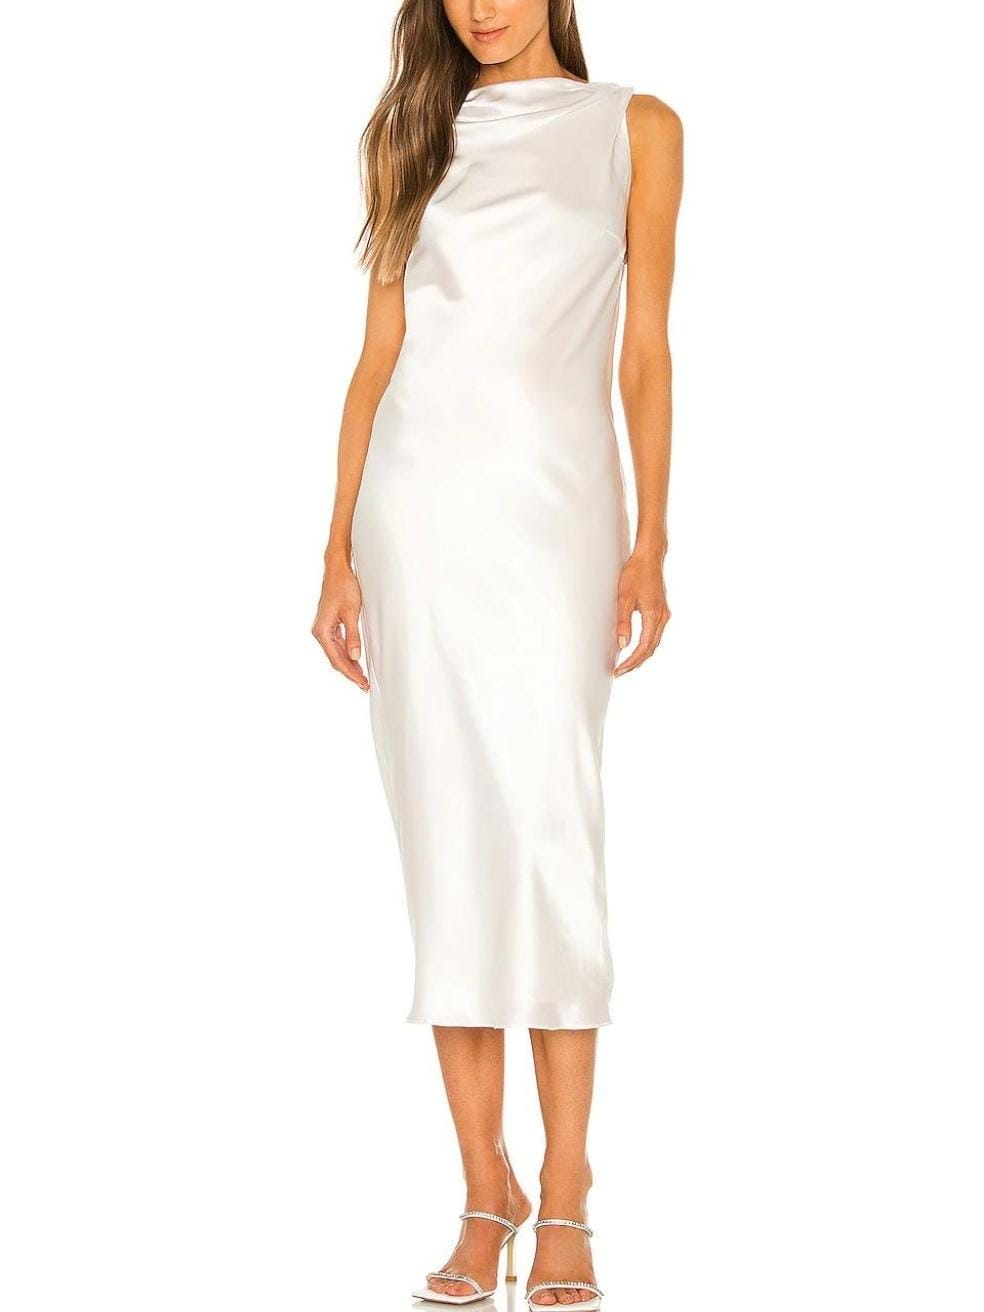 The Max Dress in White